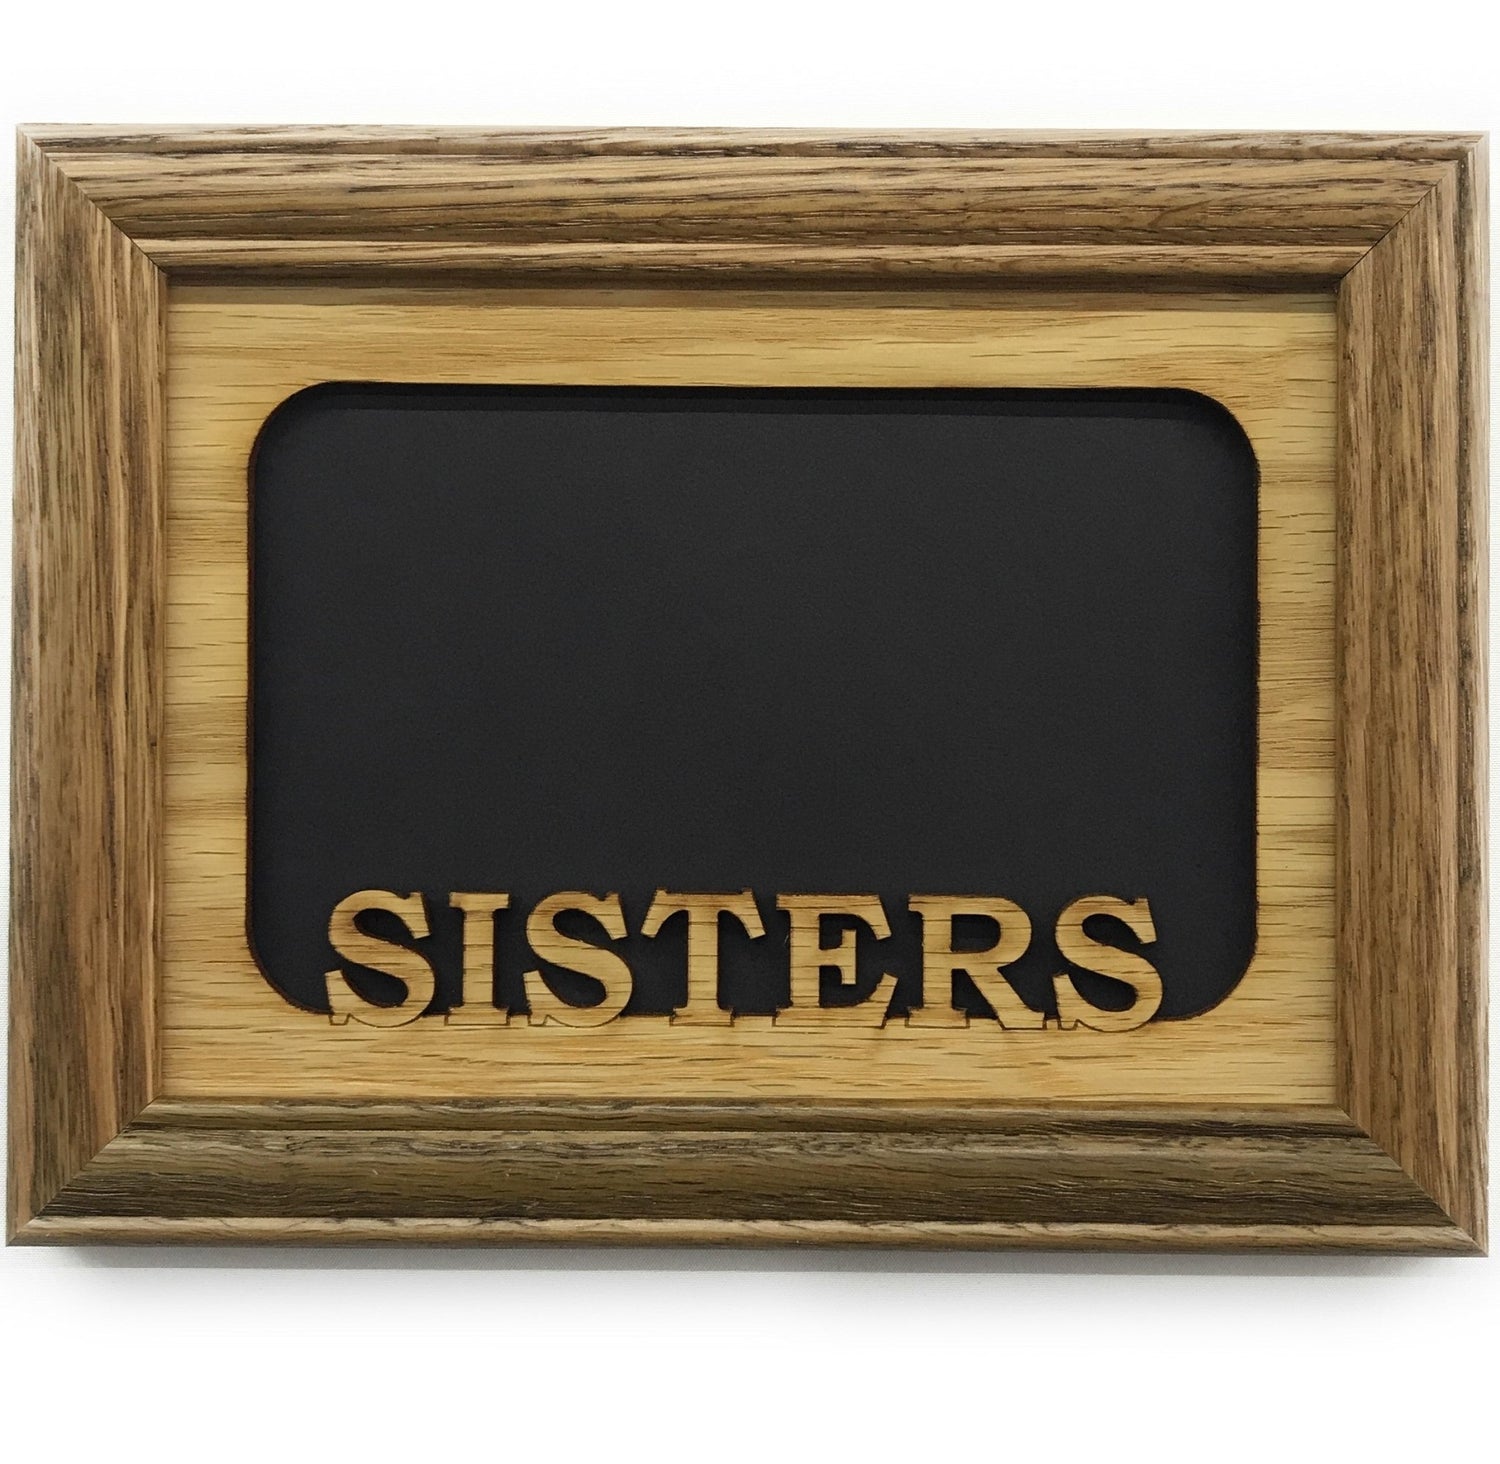 Sisters Picture Frame - 5x7 Frame Hold 4x6 Photo - Legacy Images - Picture Frames